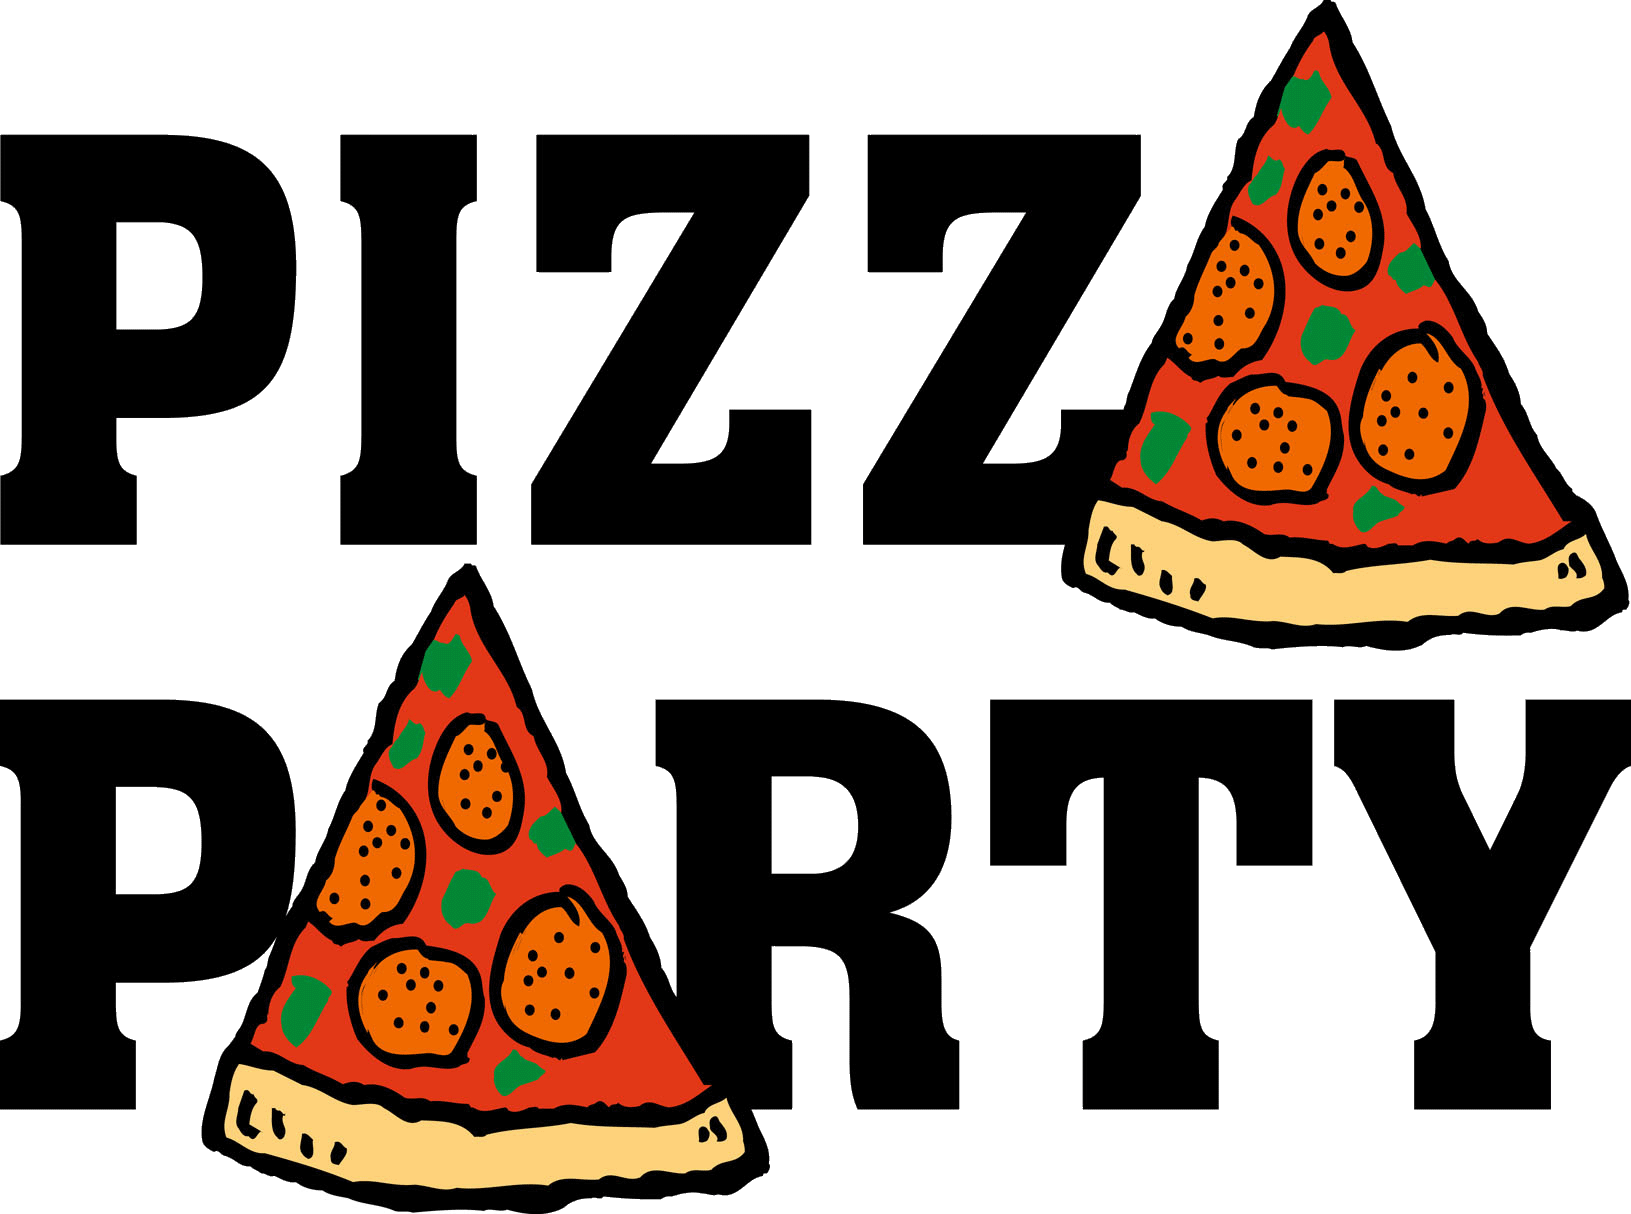 Pizza party gif youth. Storytime clipart wiggle worm